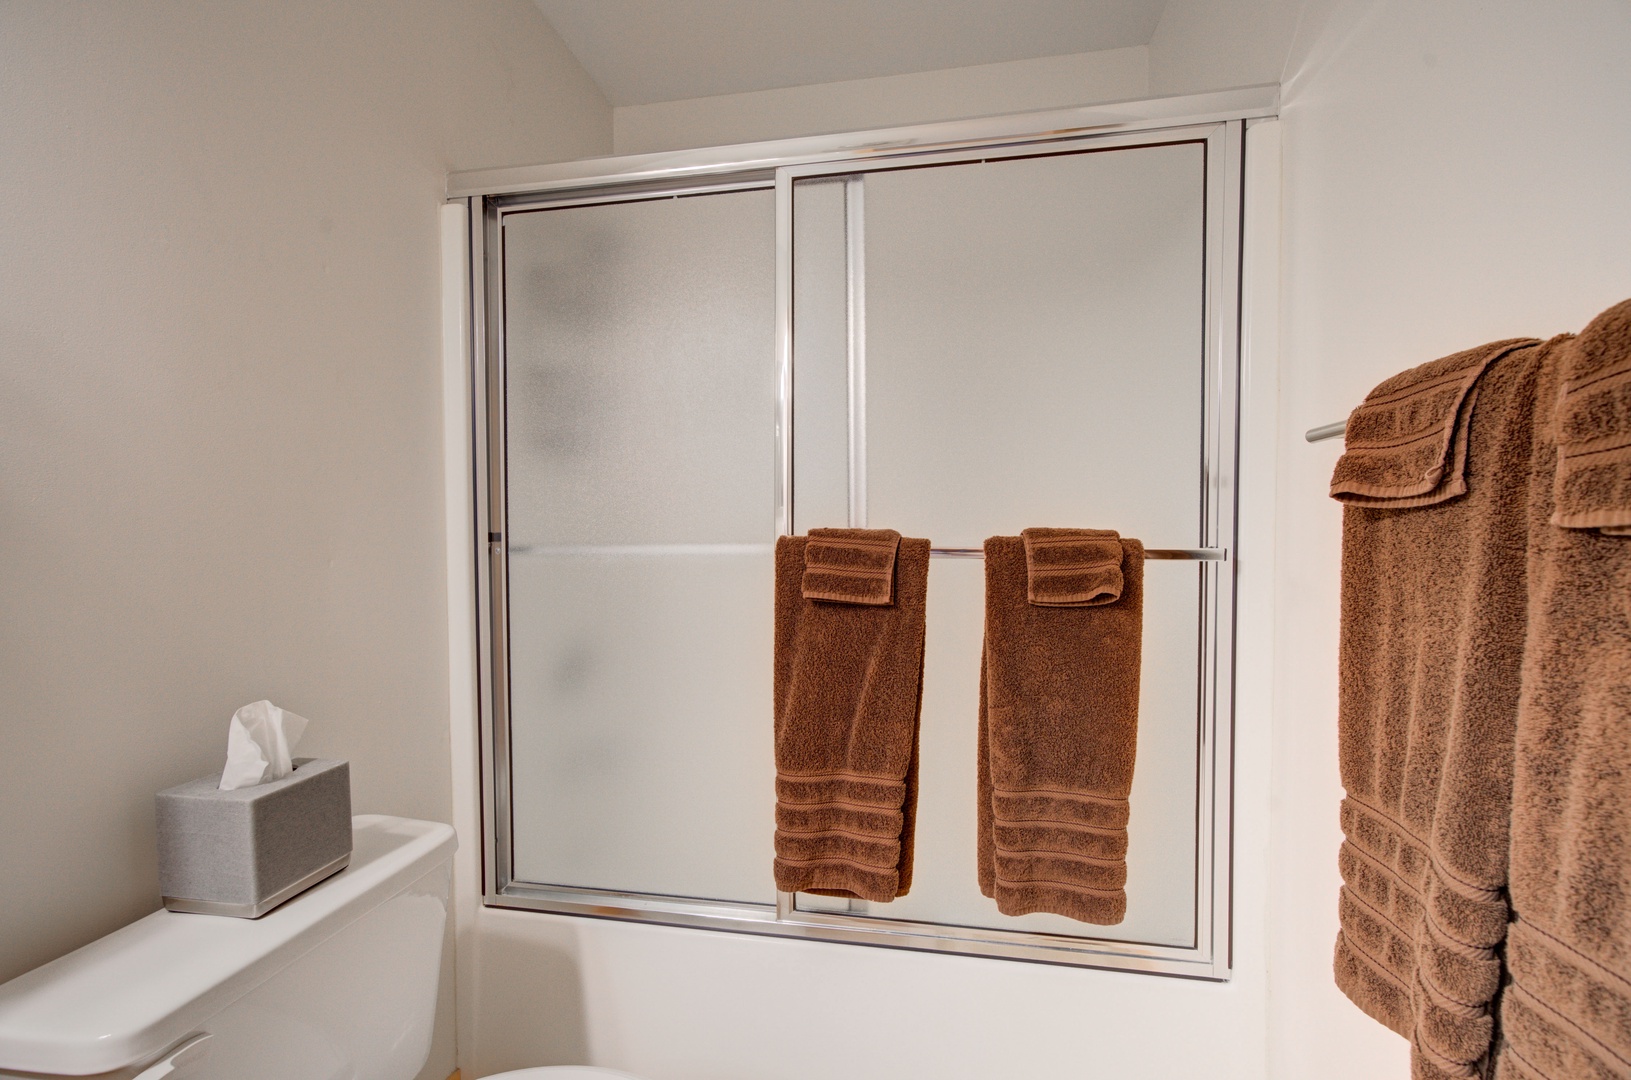 Bozeman Vacation Rentals, The Canyon Lookout - Shower/Tub combo